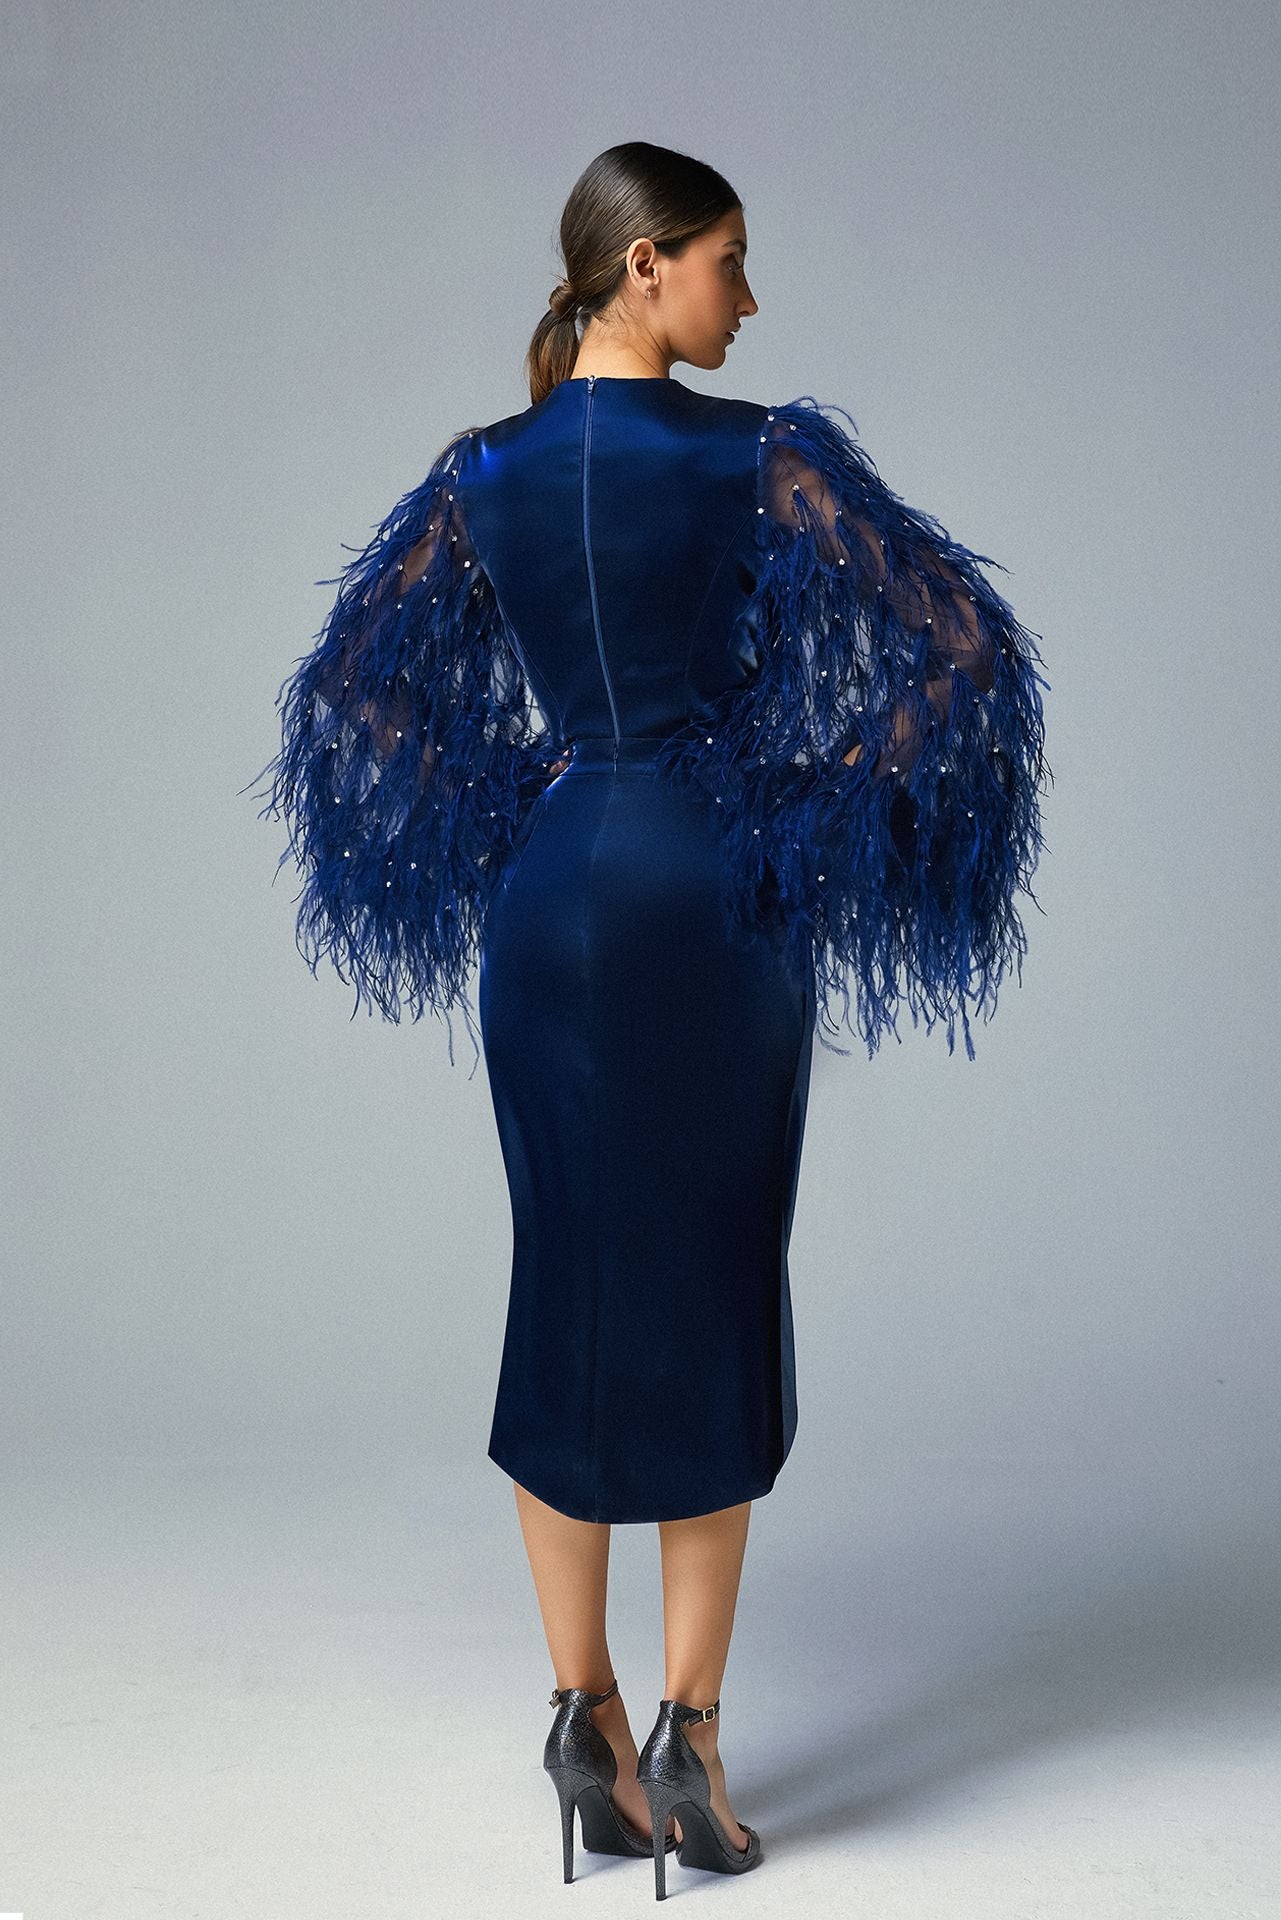 Draped V- Plunging Navy Blue Cady Top Feathered & Embroidered Sleeves & Midi Skirt